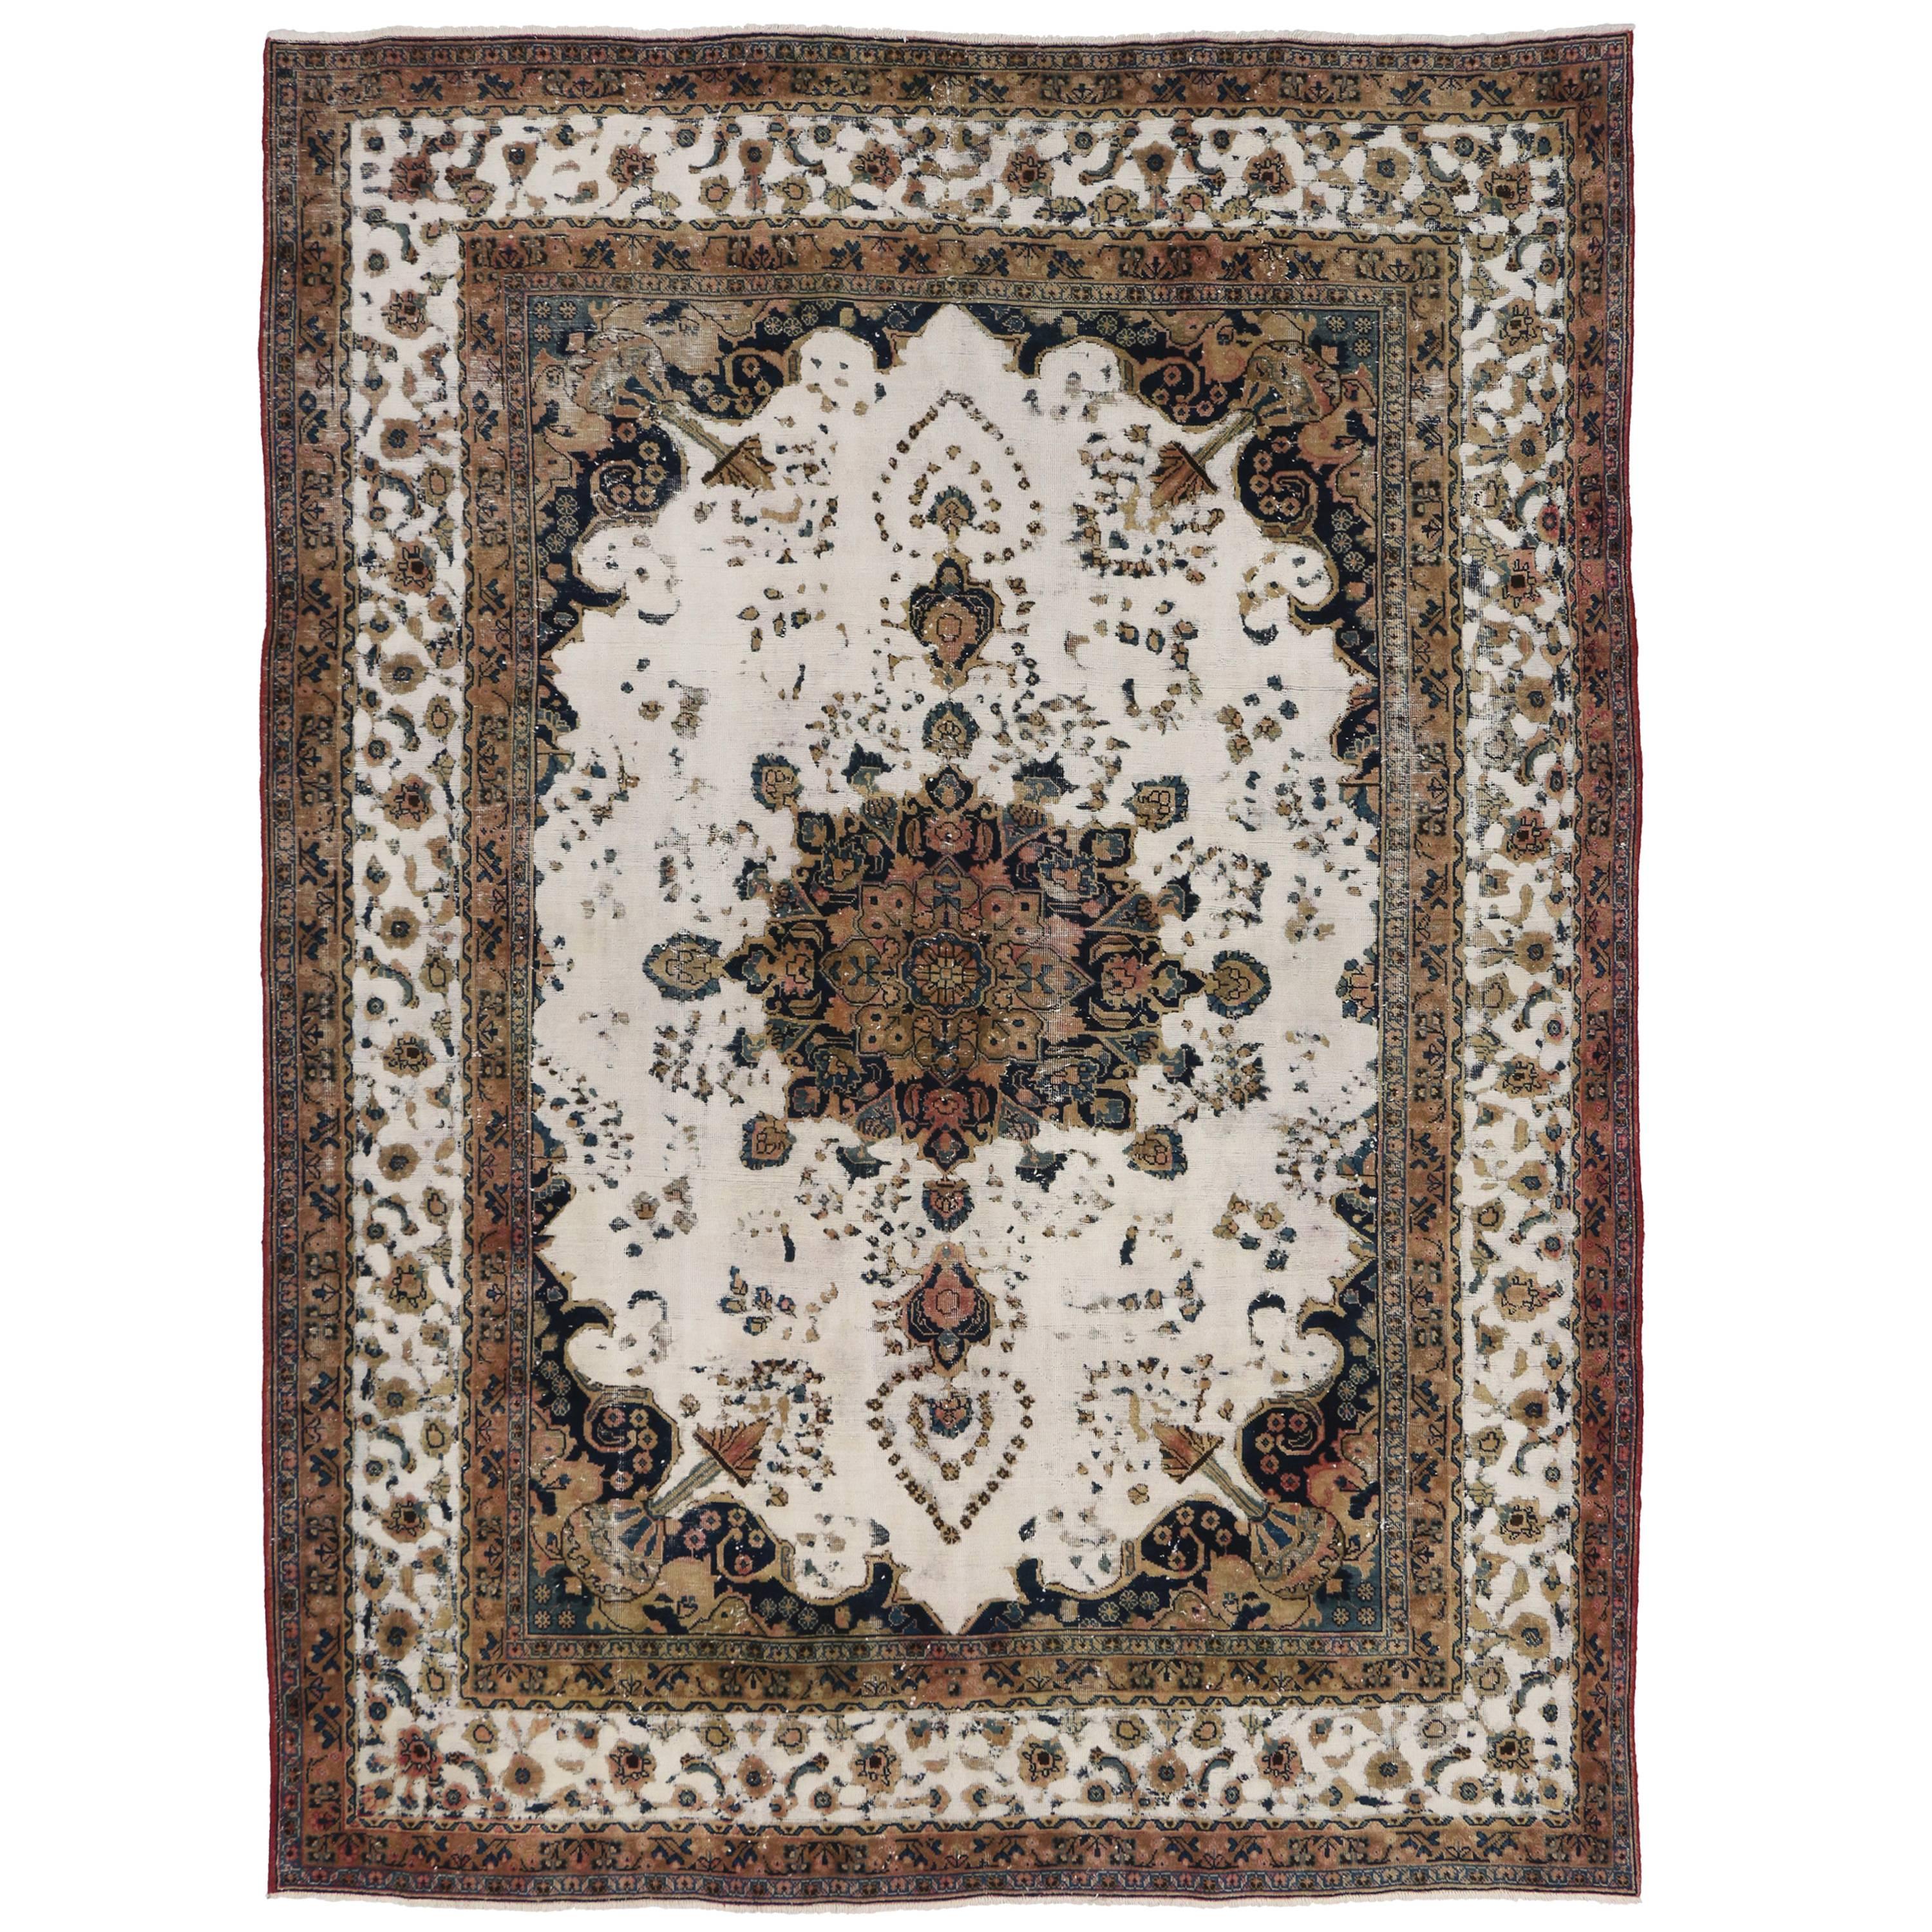 Tapis persan Mahal ancien vieilli avec style William and Mary moderne en vente